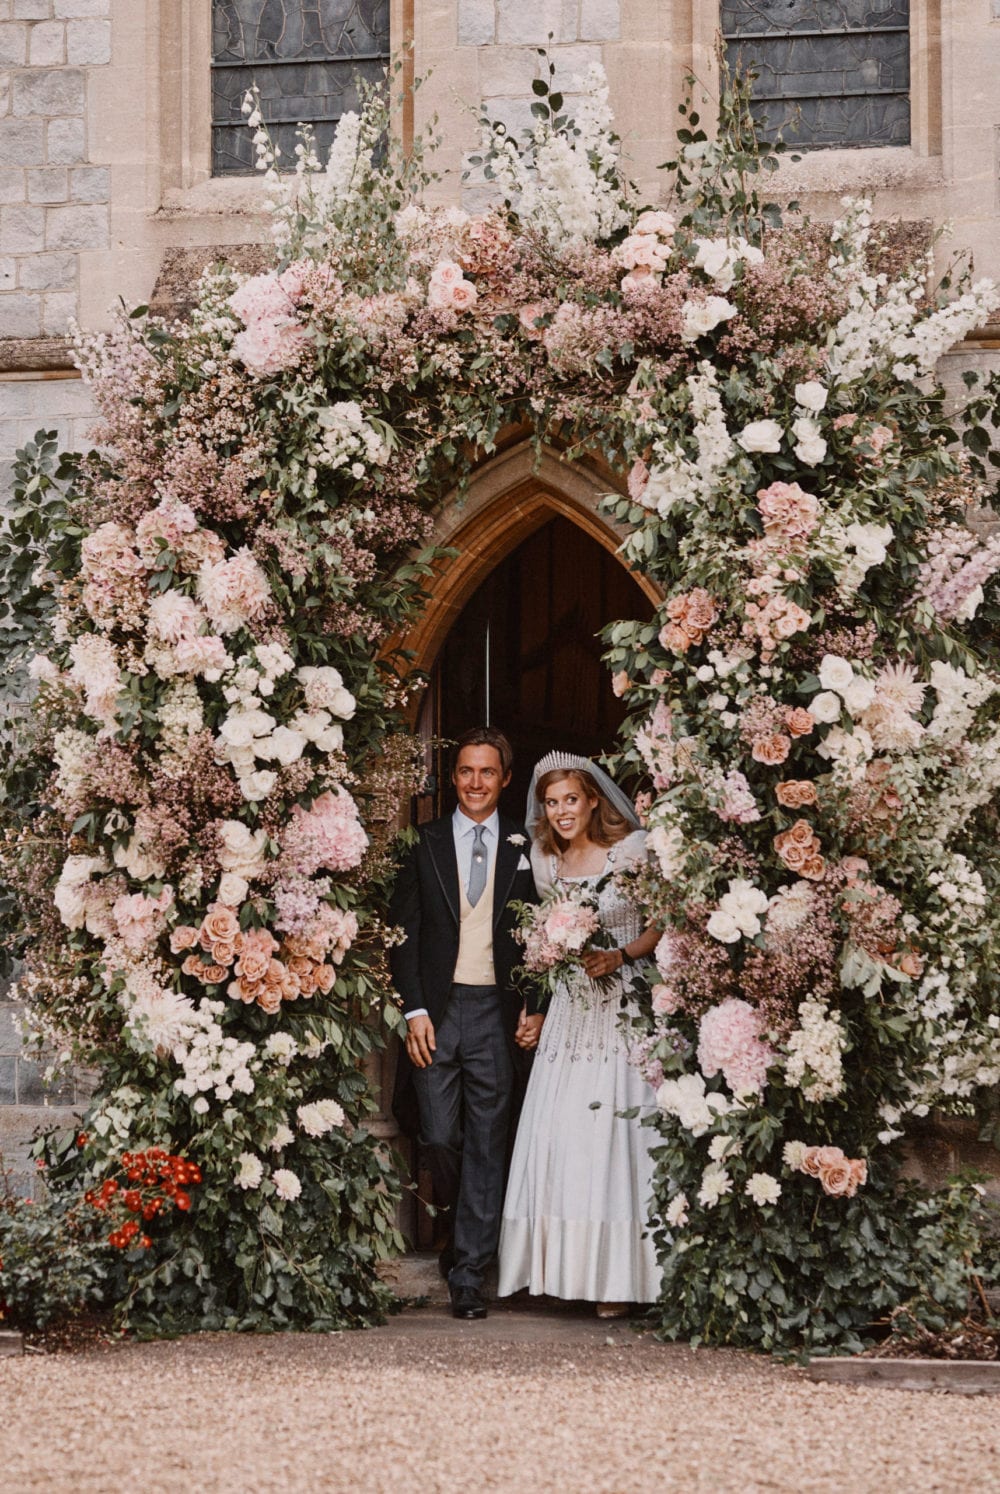 Britain's Princess Beatrice and Edoardo Mapelli Mozzi leave The Royal Chapel of All Saints at Royal Lodge after their wedding, in Windsor, Britain, in this official wedding photograph released by the Royal Communications on July 18, 2020. Benjamin Wheeler/Pool via REUTERS